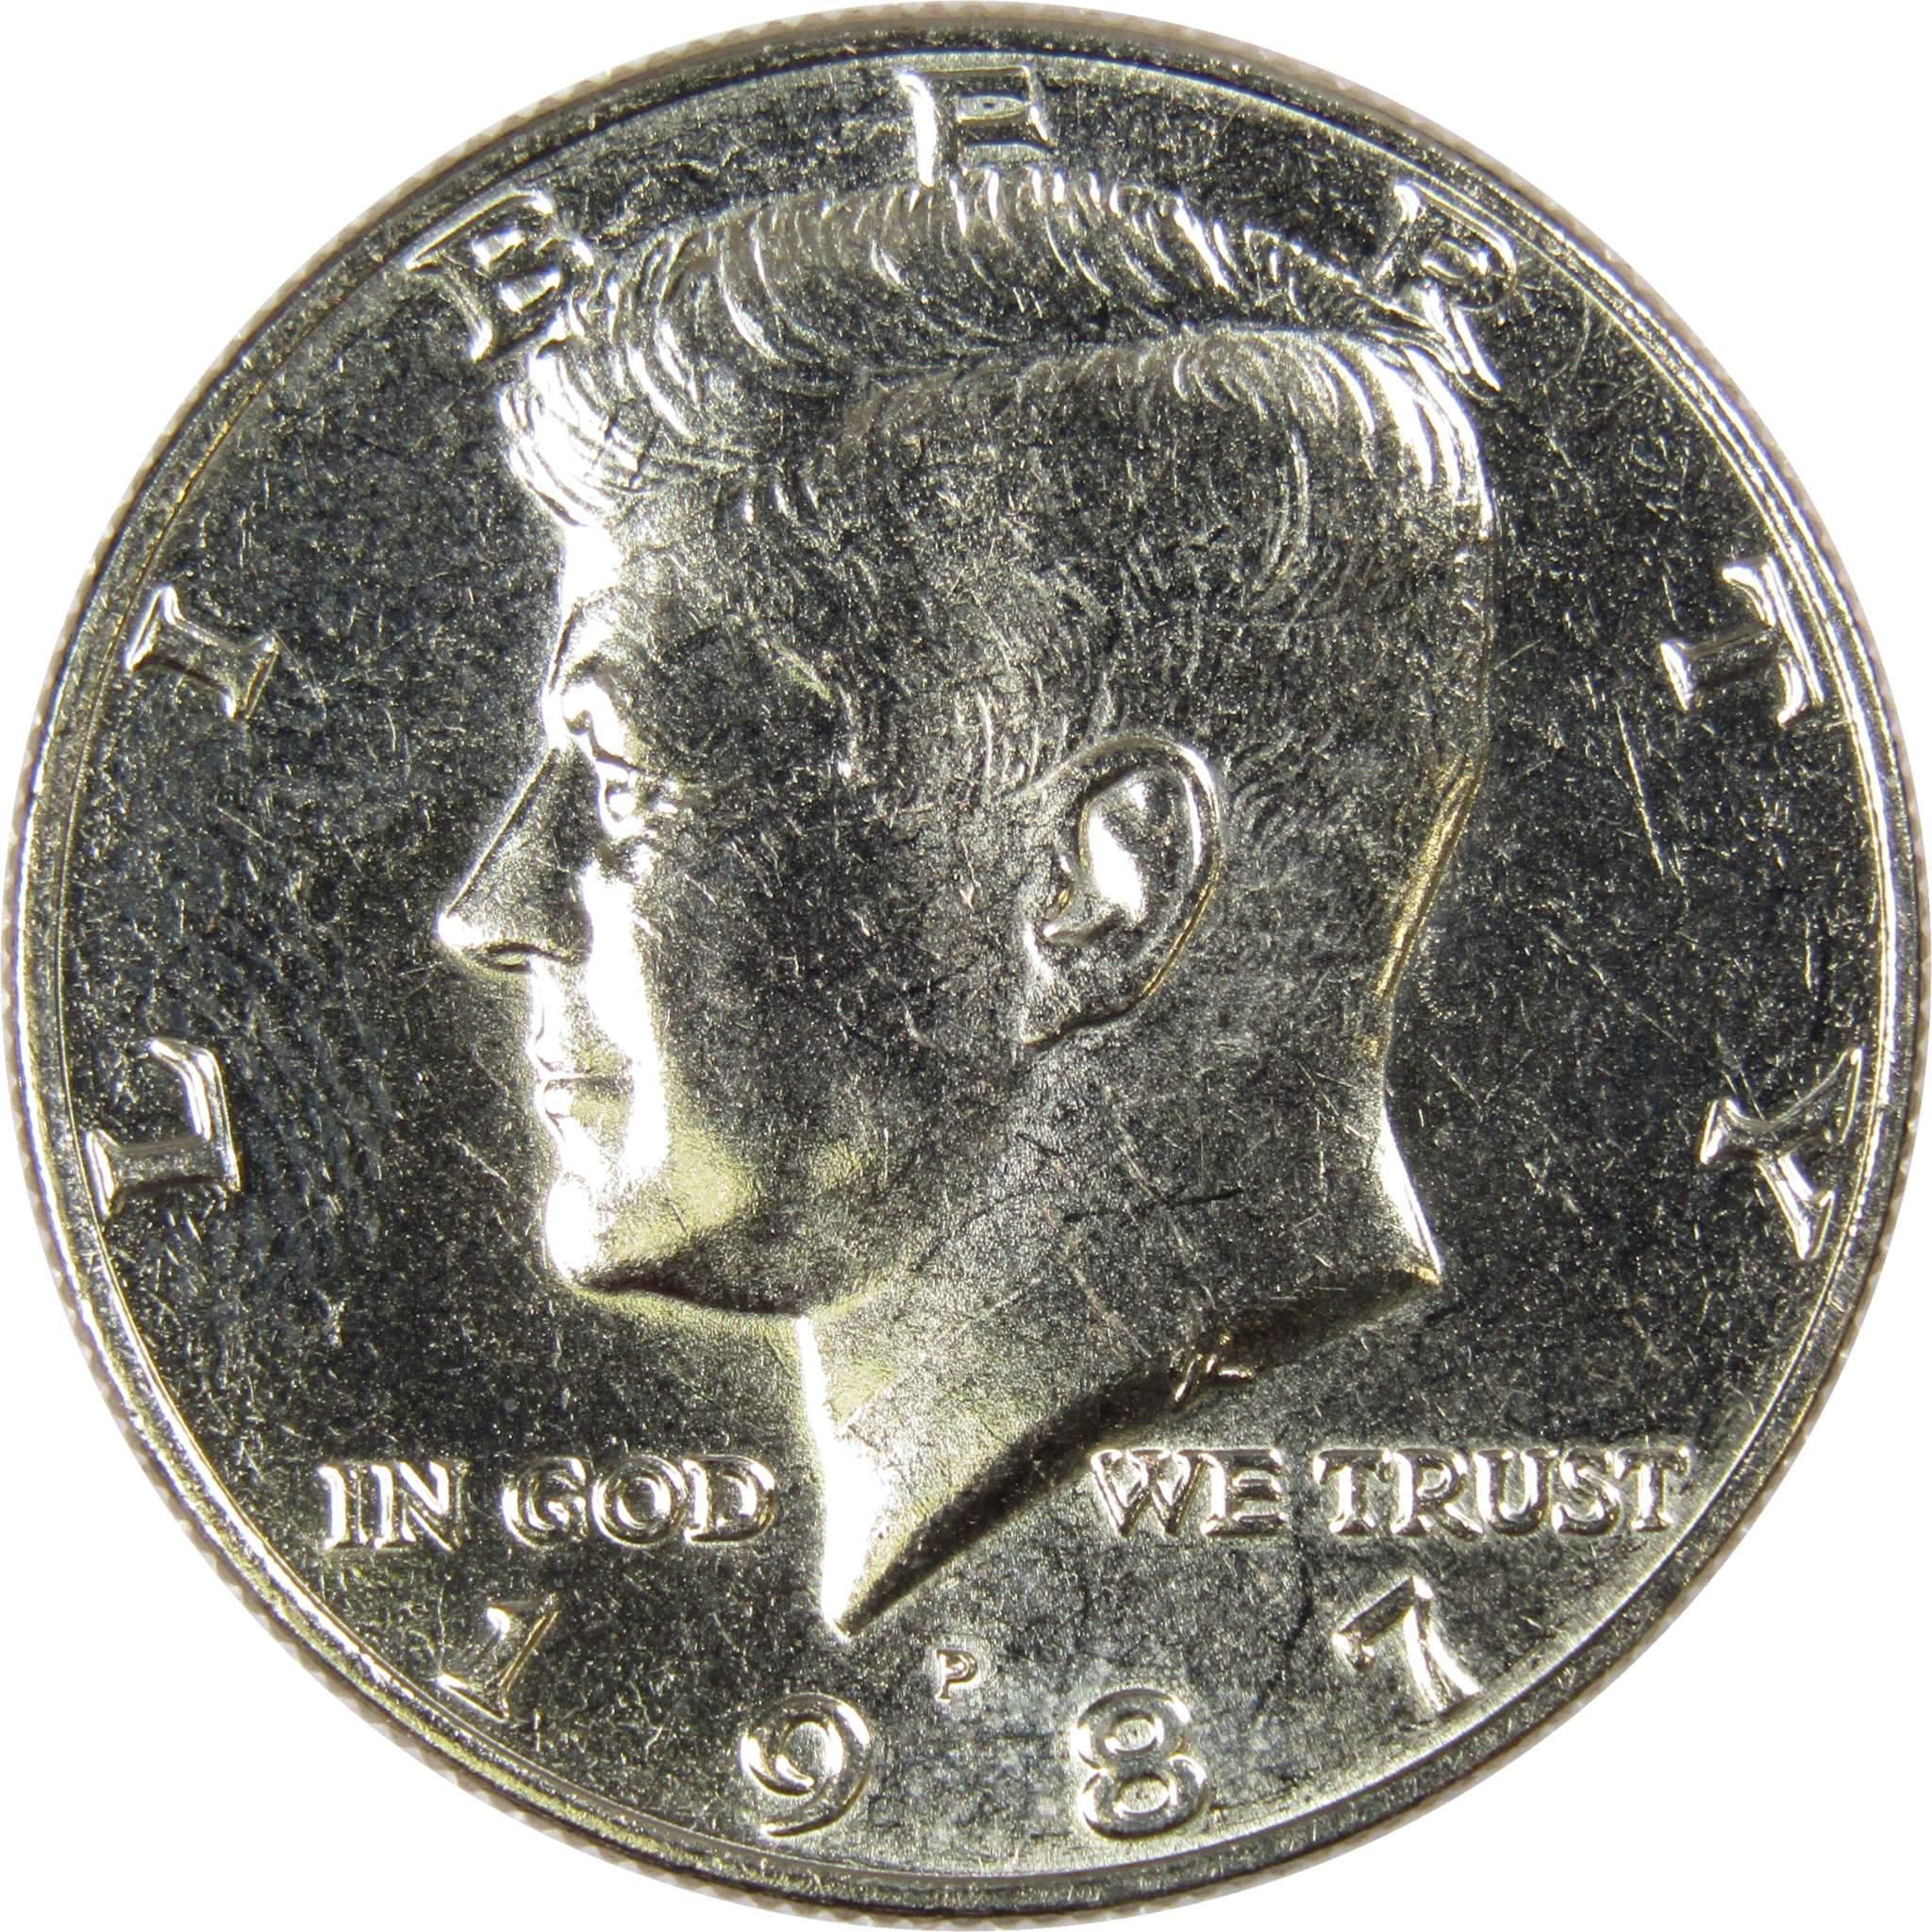 1987 P Kennedy Half Dollar BU Uncirculated Mint State 50c US Coin Collectible